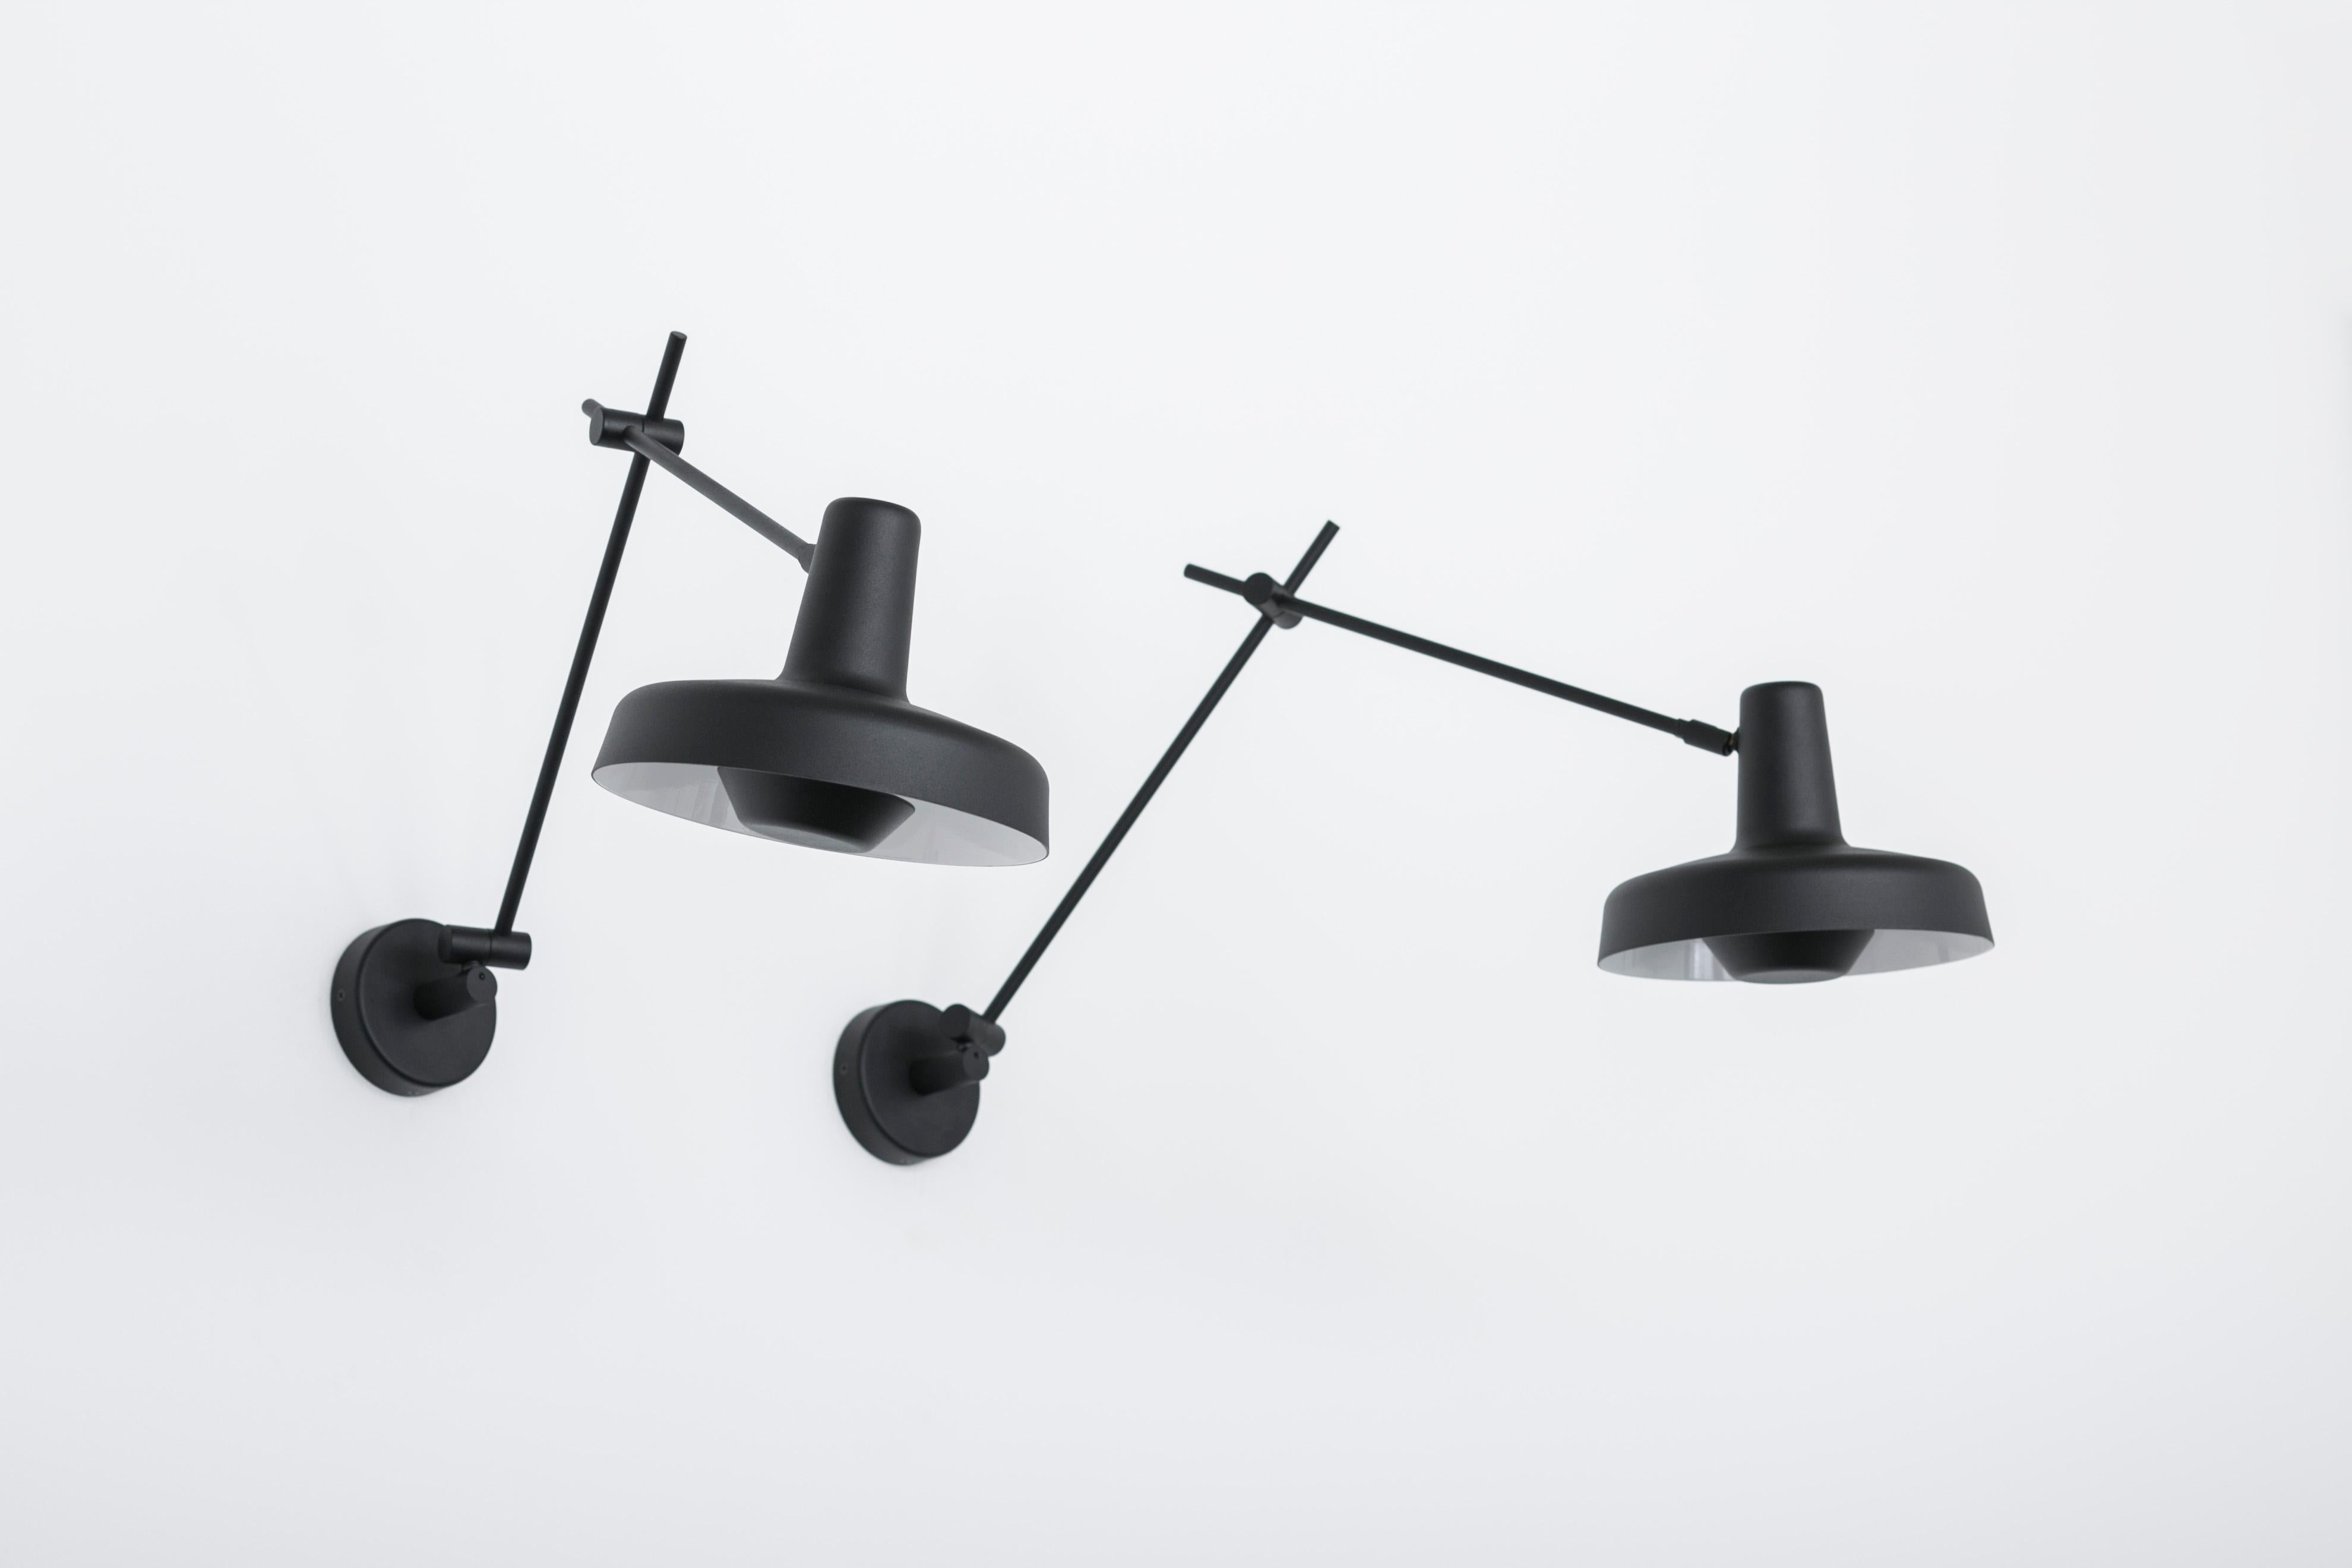 The Arigato family of fixtures has appreciation built into its very DNA given its name means thank you in Japanese. According to its design team, Tihana Taraba, Ivana Pavic and Filip Despot of Grupa Products, this was intentional, as they meant for